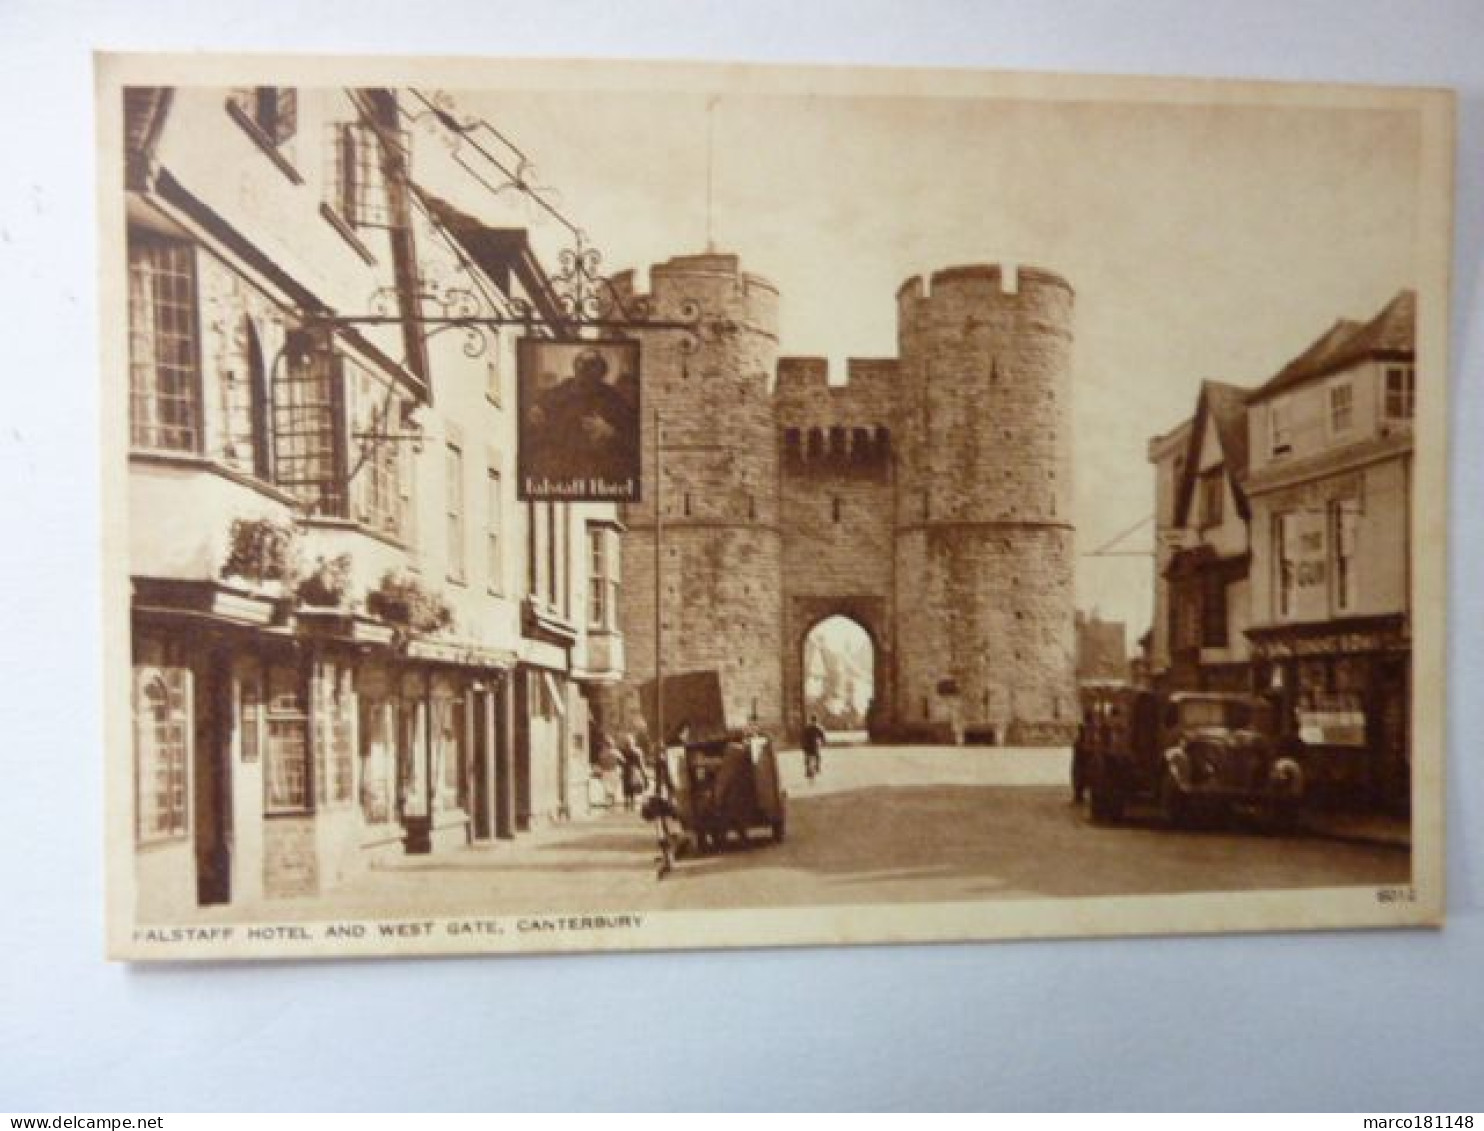 Falstaff Hotel And West Gate, CANTERBURY - Dining Rooms, The GUN - Canterbury